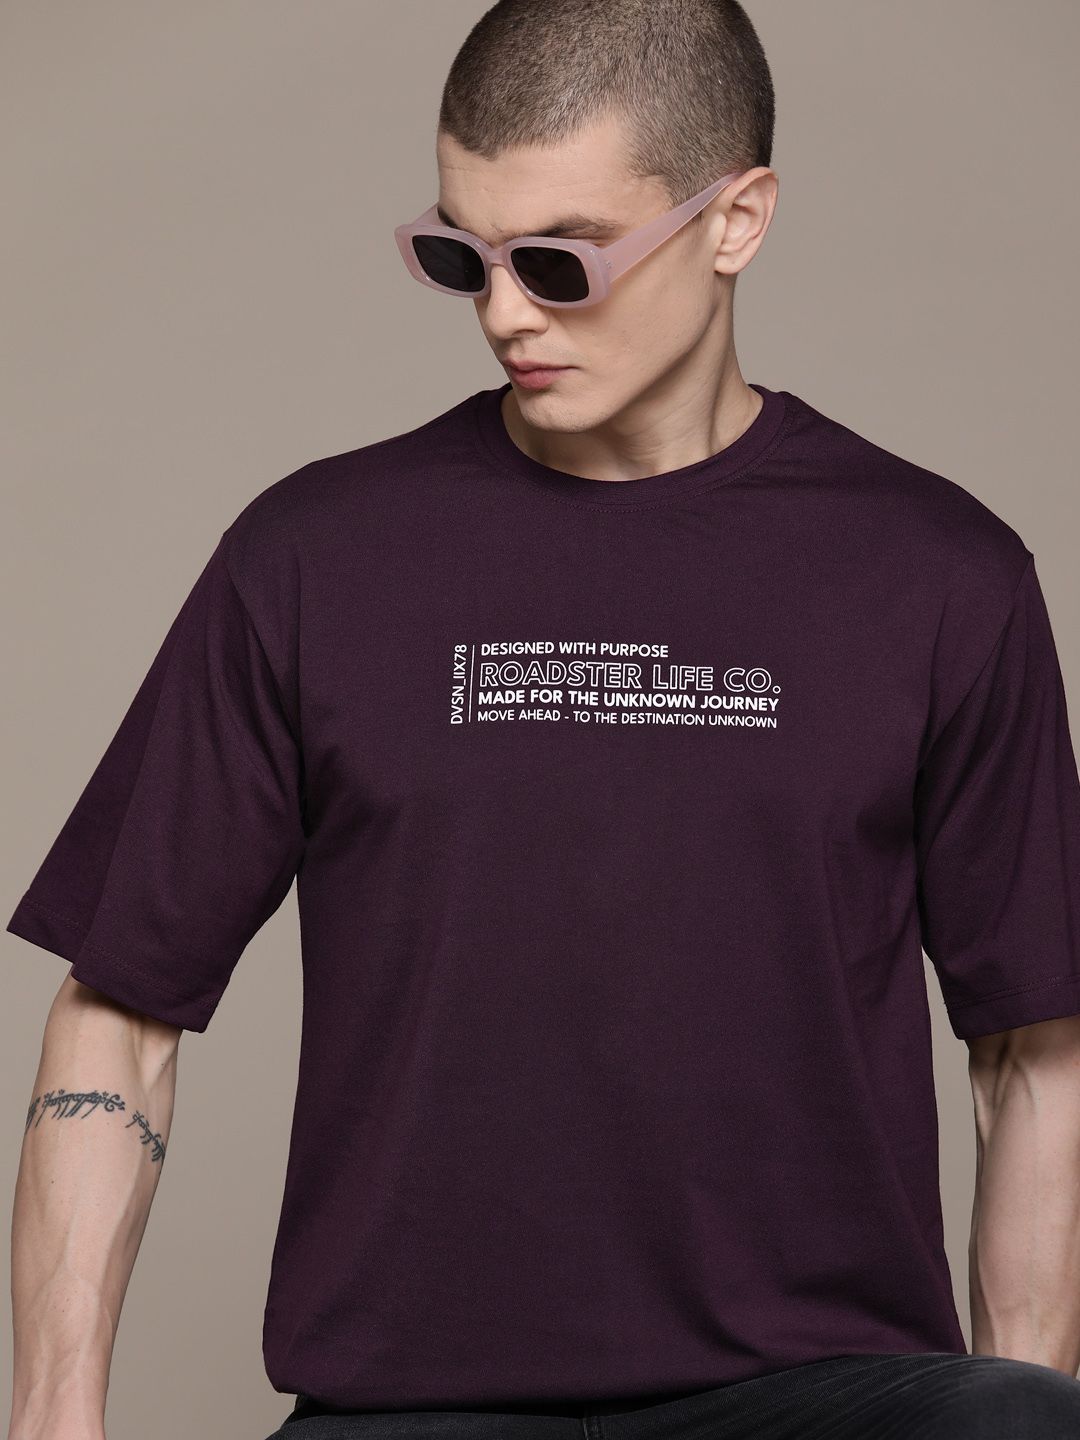 The Roadster Lifestyle Co. Printed Relaxed Fit T-shirt